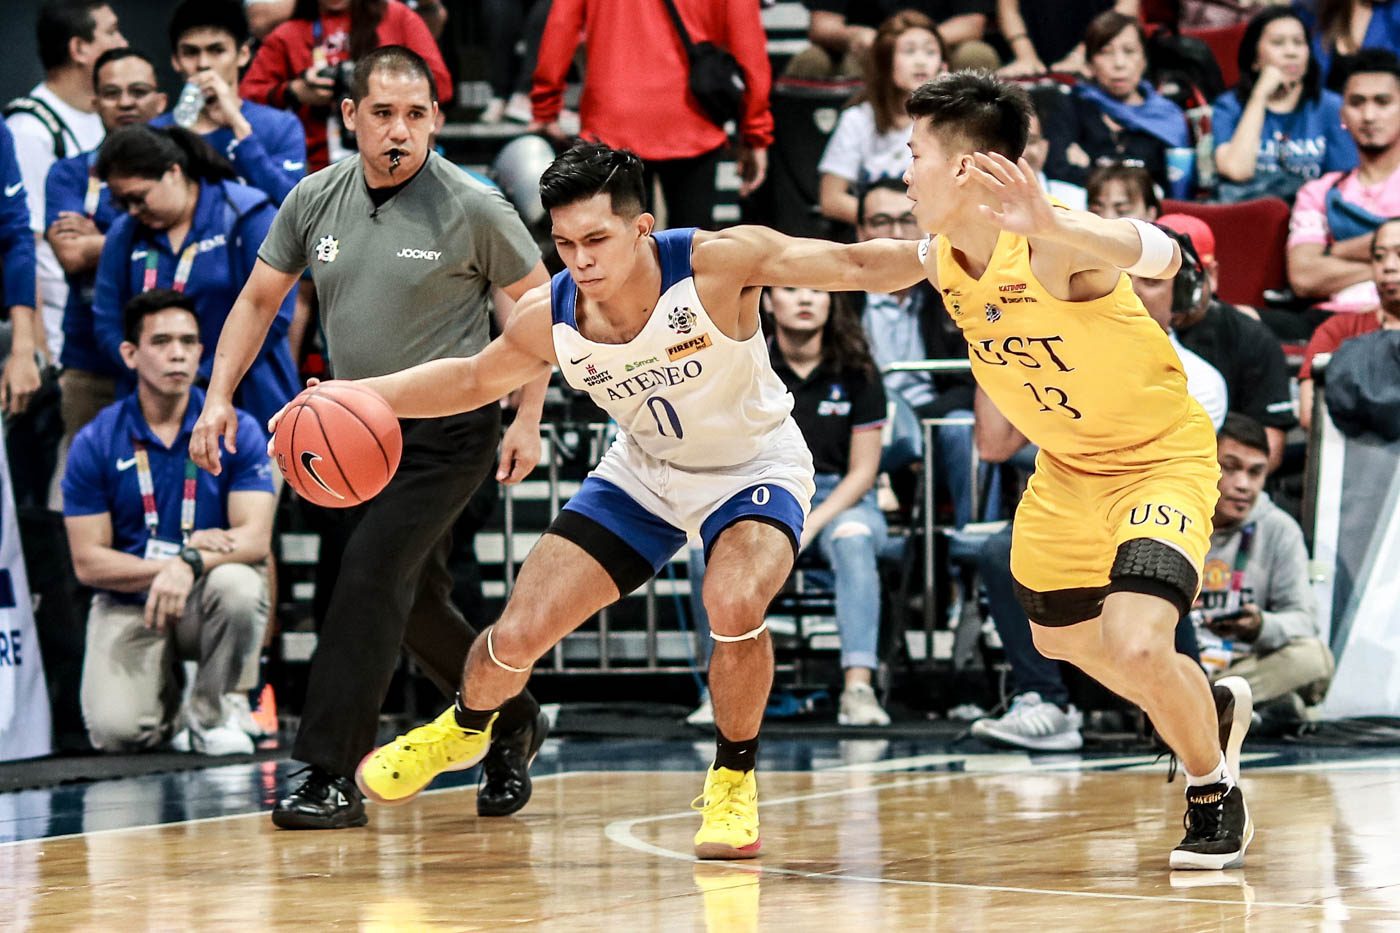 No more scare: Ateneo sweeps UST to stay unbeaten